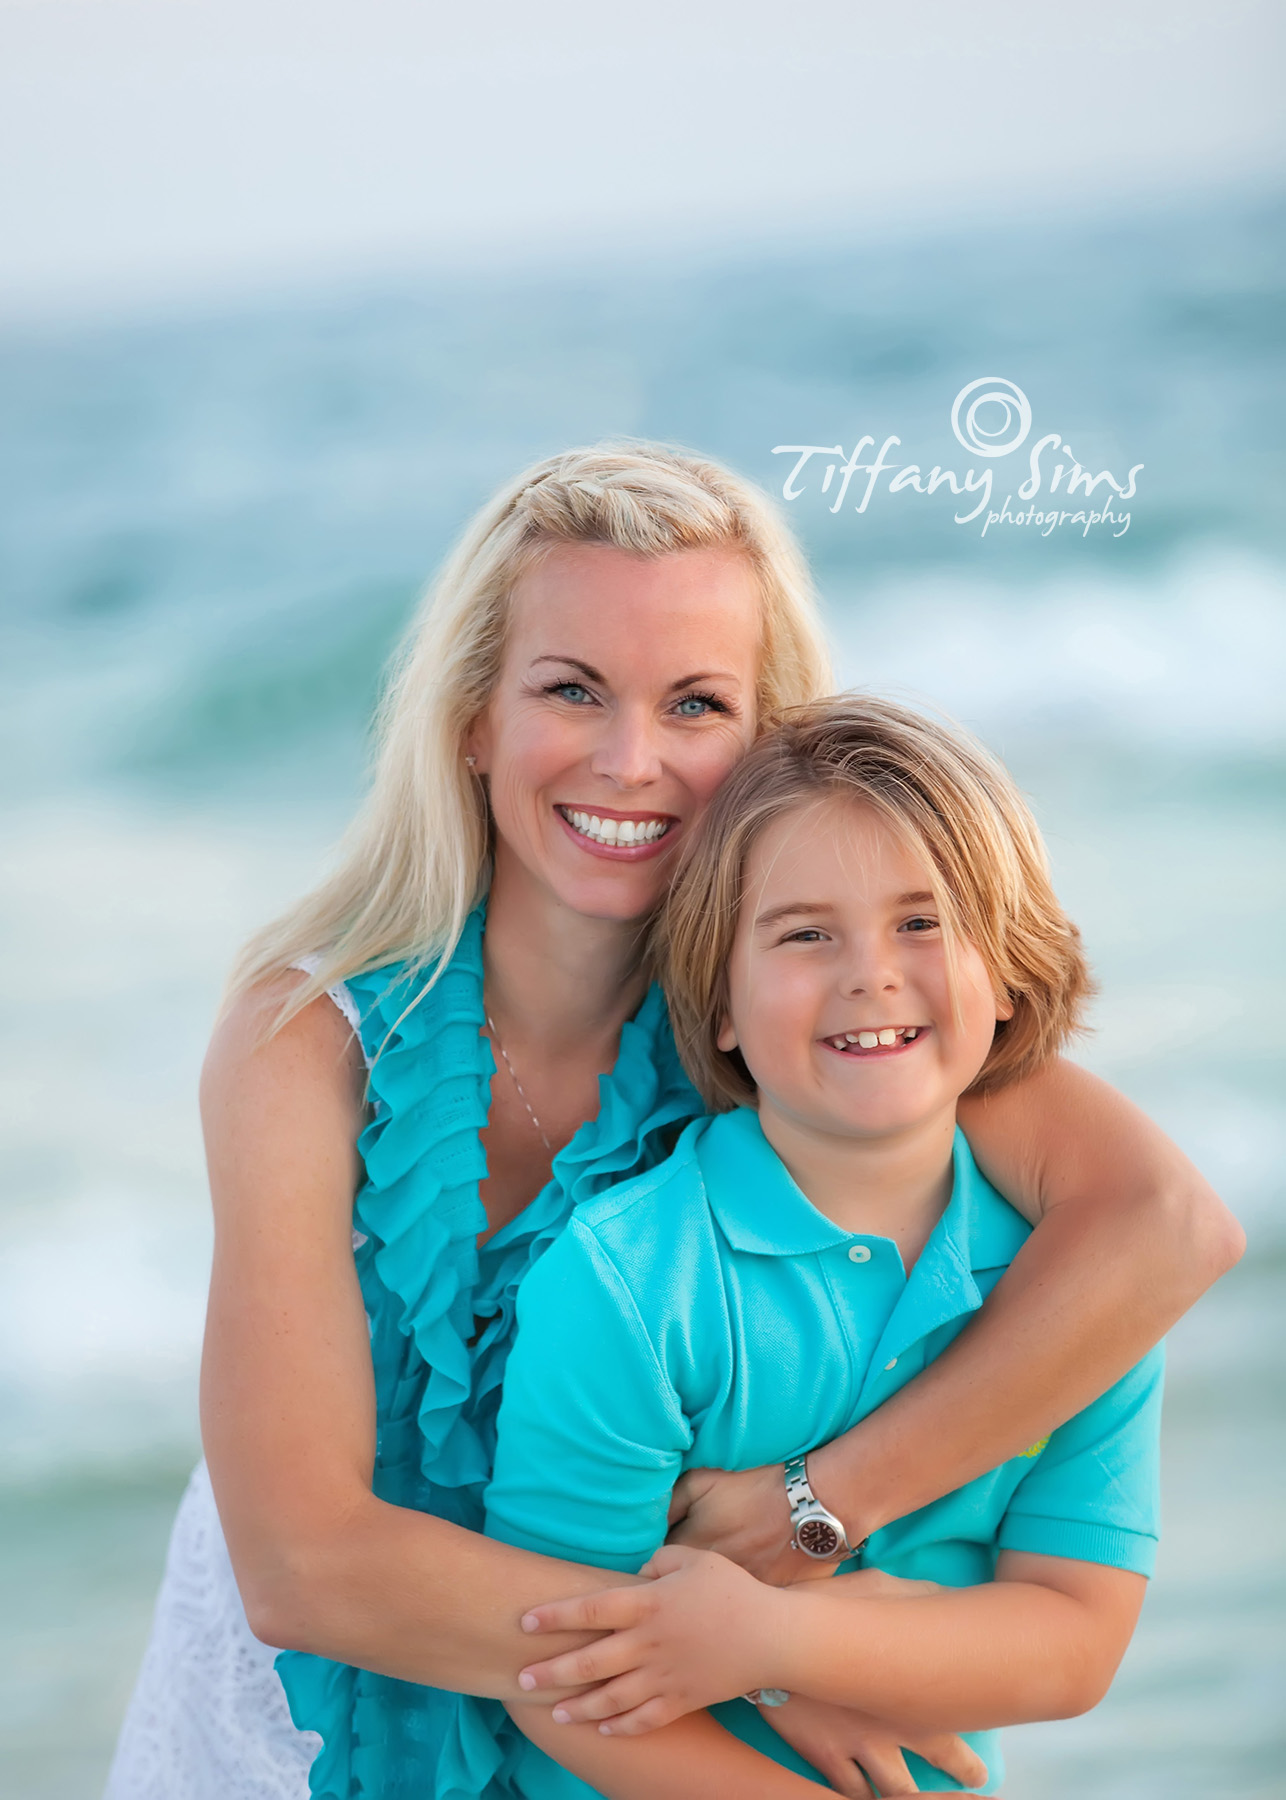 Destin Photography by Tiffany Sims Photography #destin #destinphotography #destinbeachphotography #30aphotography #30abeachphotography #destinphotographer #30aphotographer #fortwaltonbeachphotography #okaloosaislandphotography | Fort Walton Beach Photography by Tiffany Sims Photography - #destinphotography #destinbeachphotographer #destinphotographers